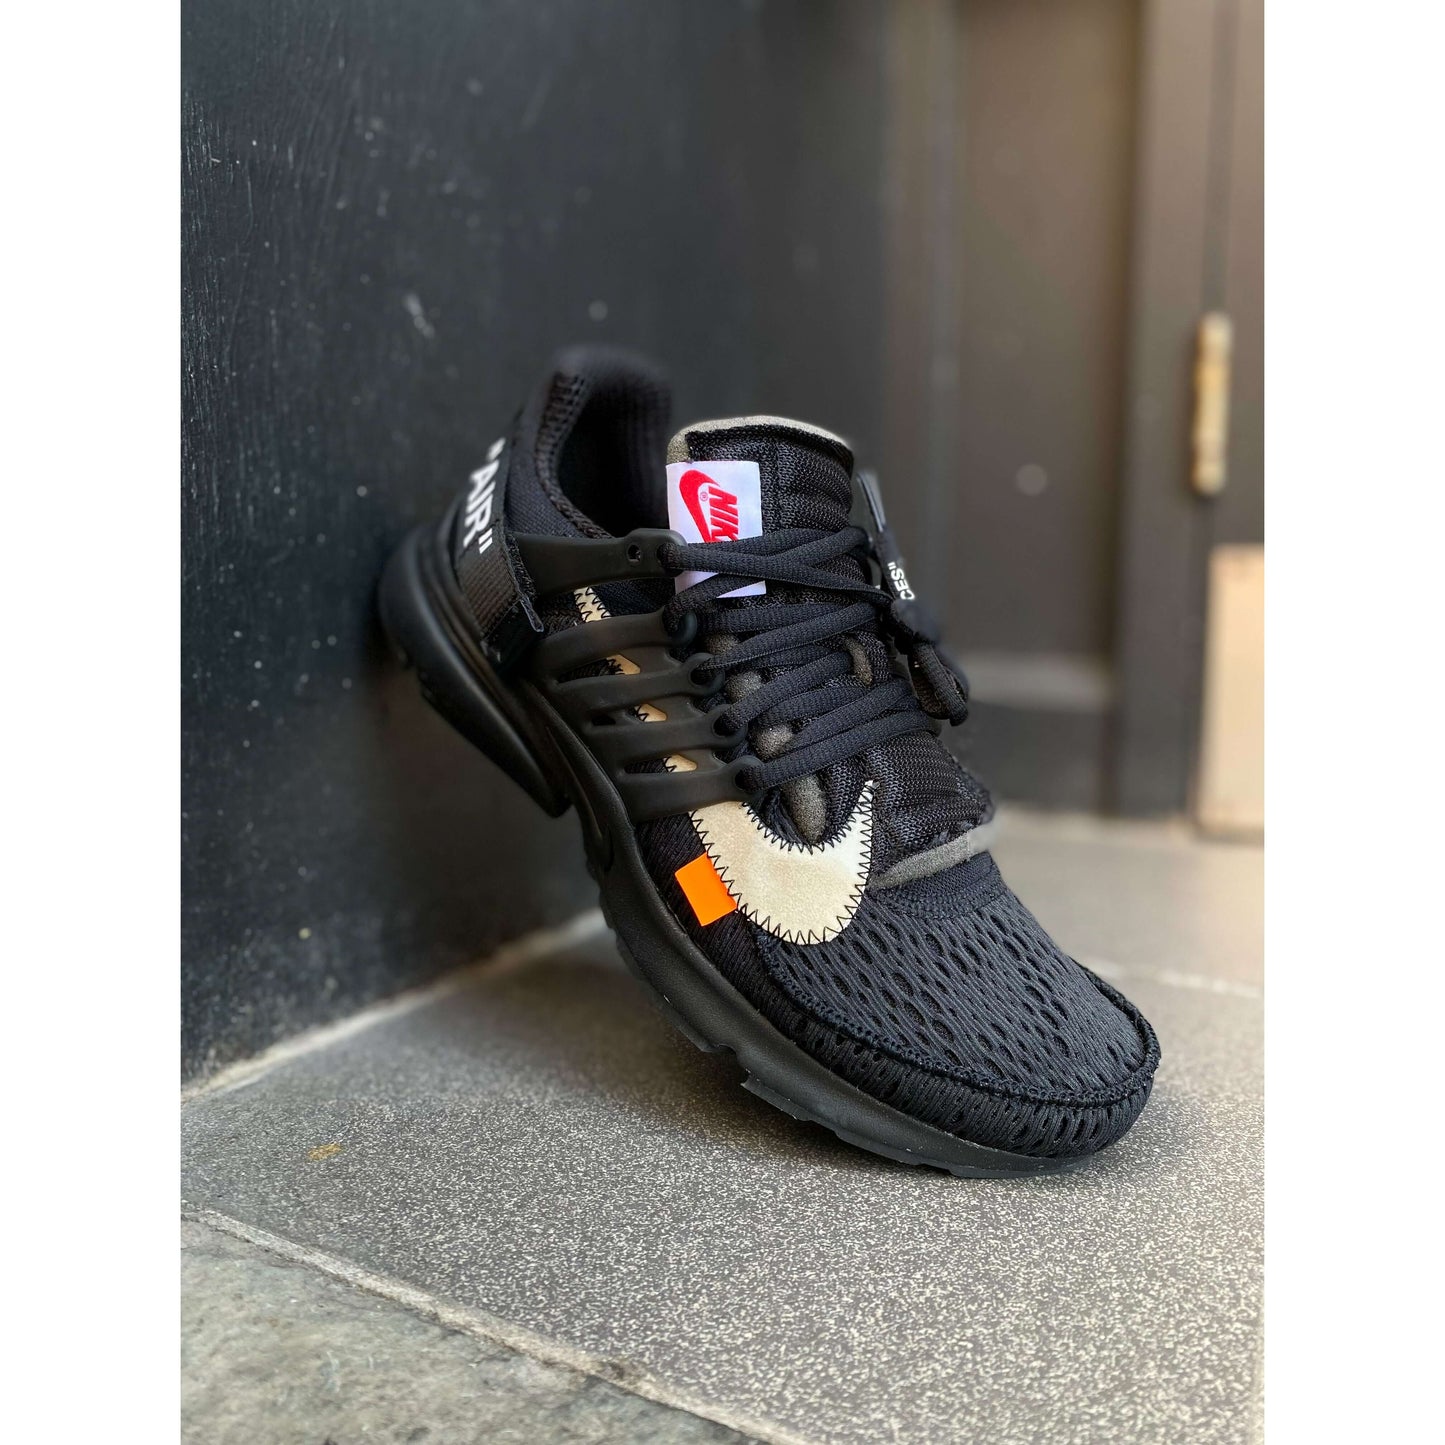 Air Presto Off-White Black (2018) by Nike from £1050.00